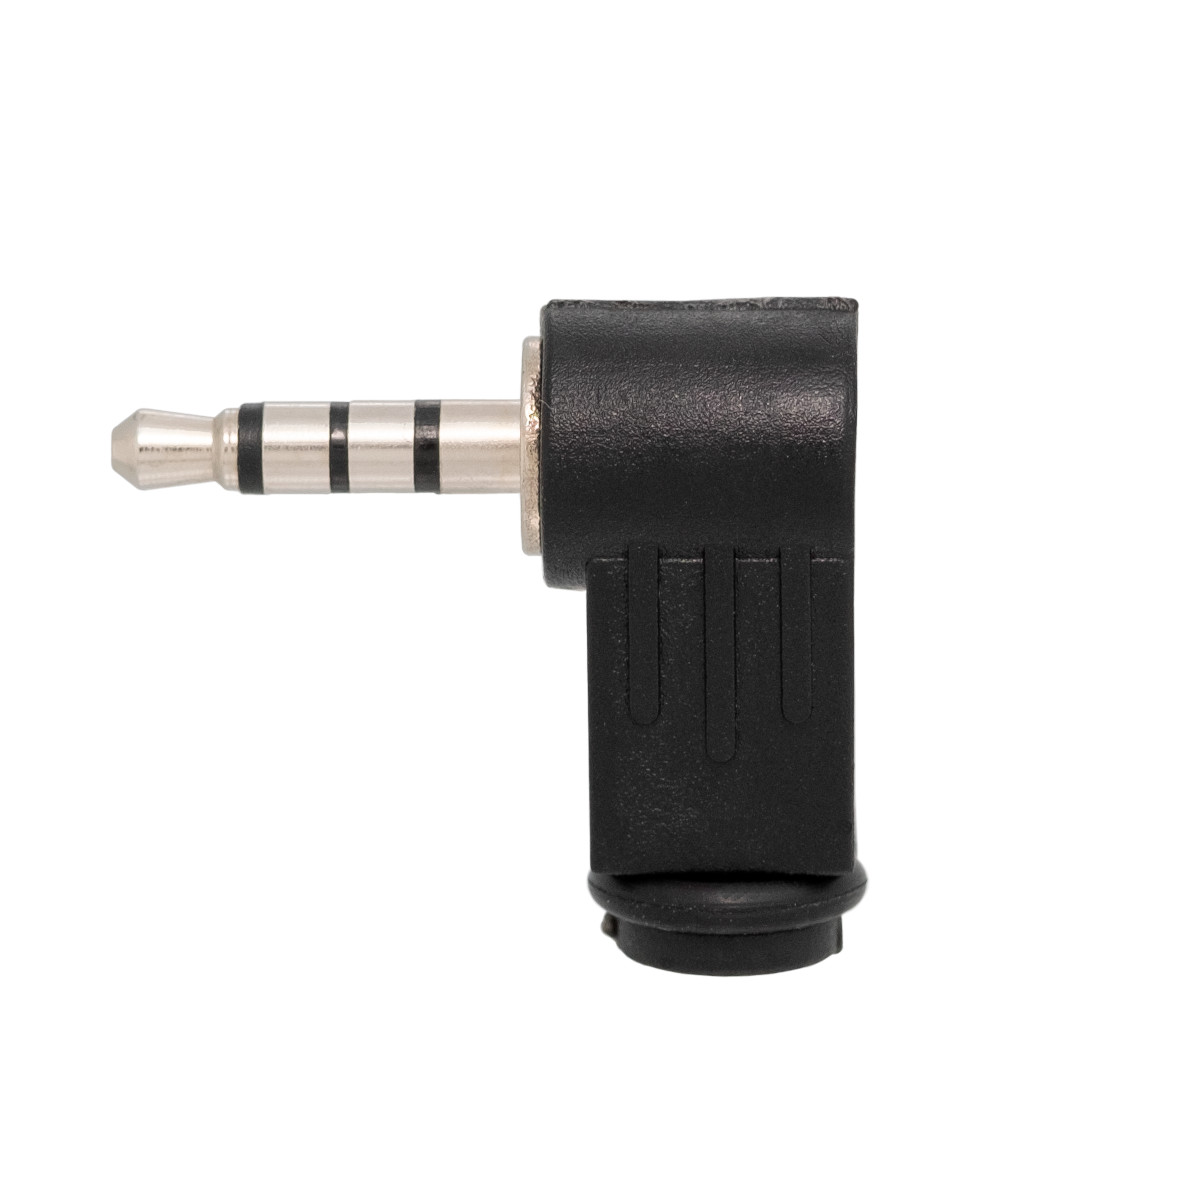 Jack connector 3.5mm 4cont. angled - Economic